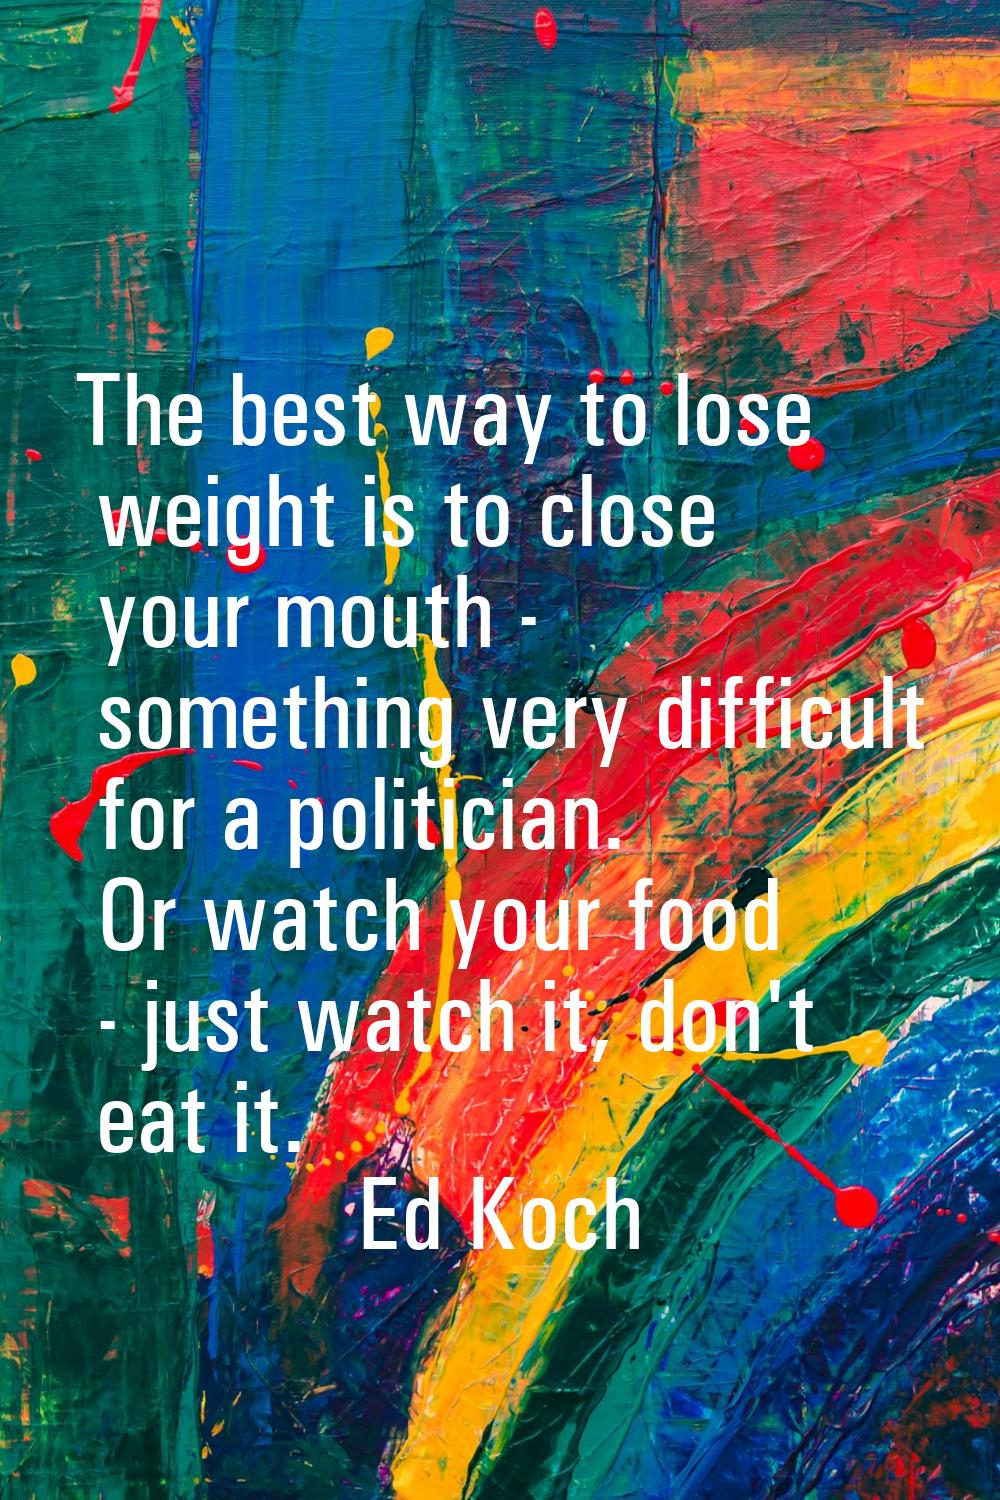 The best way to lose weight is to close your mouth - something very difficult for a politician. Or 